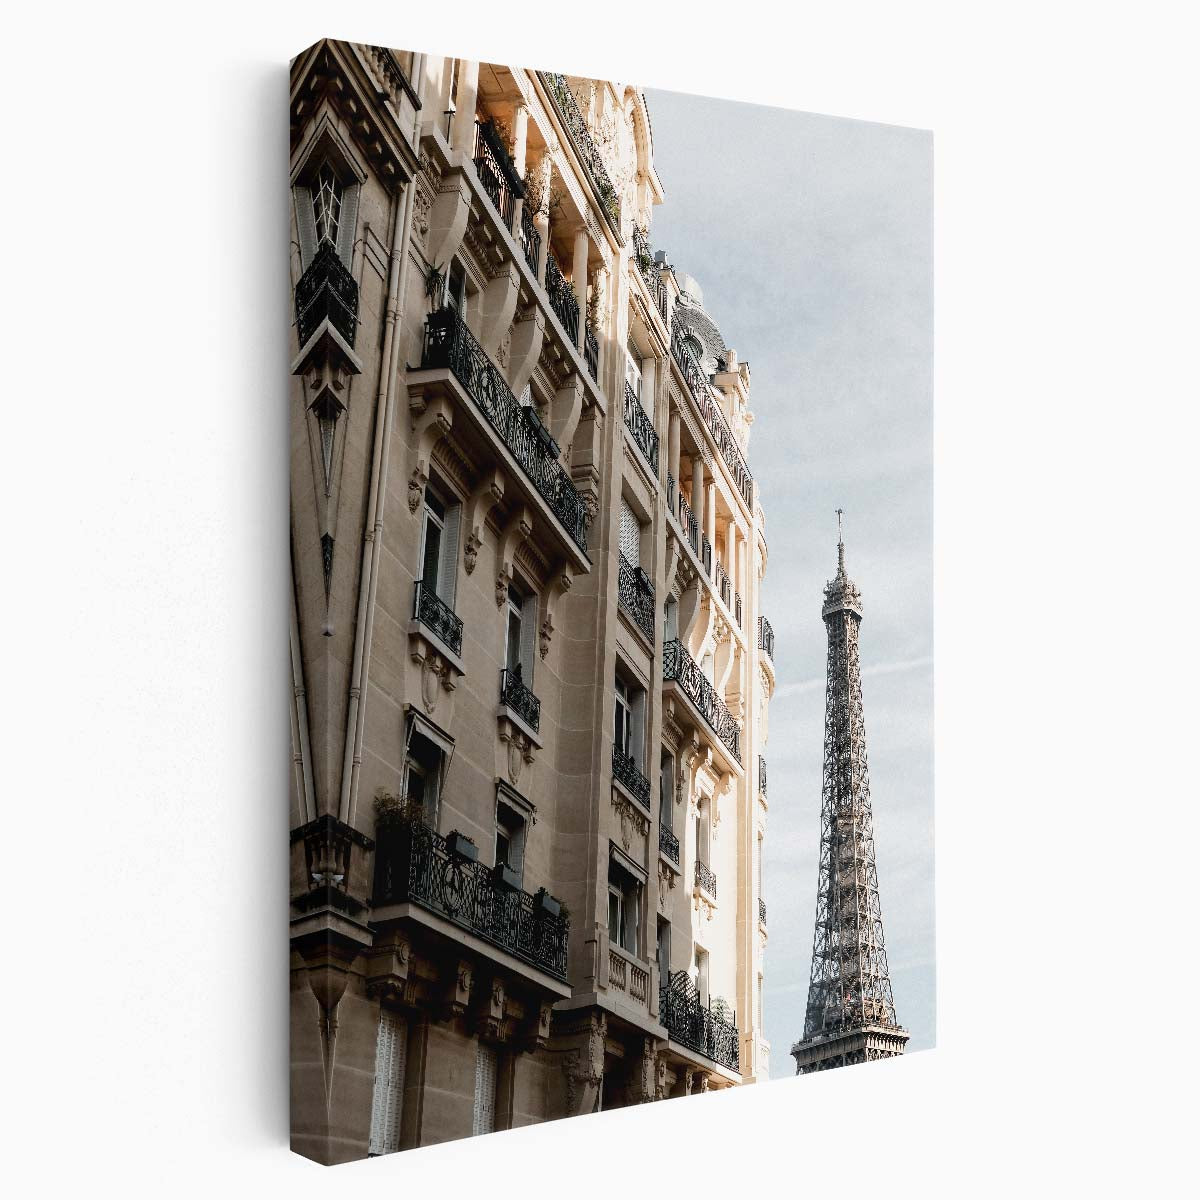 Paris Eiffel Tower Iconic Architecture Photography, Urban Cityscape Wall Art by Luxuriance Designs, made in USA